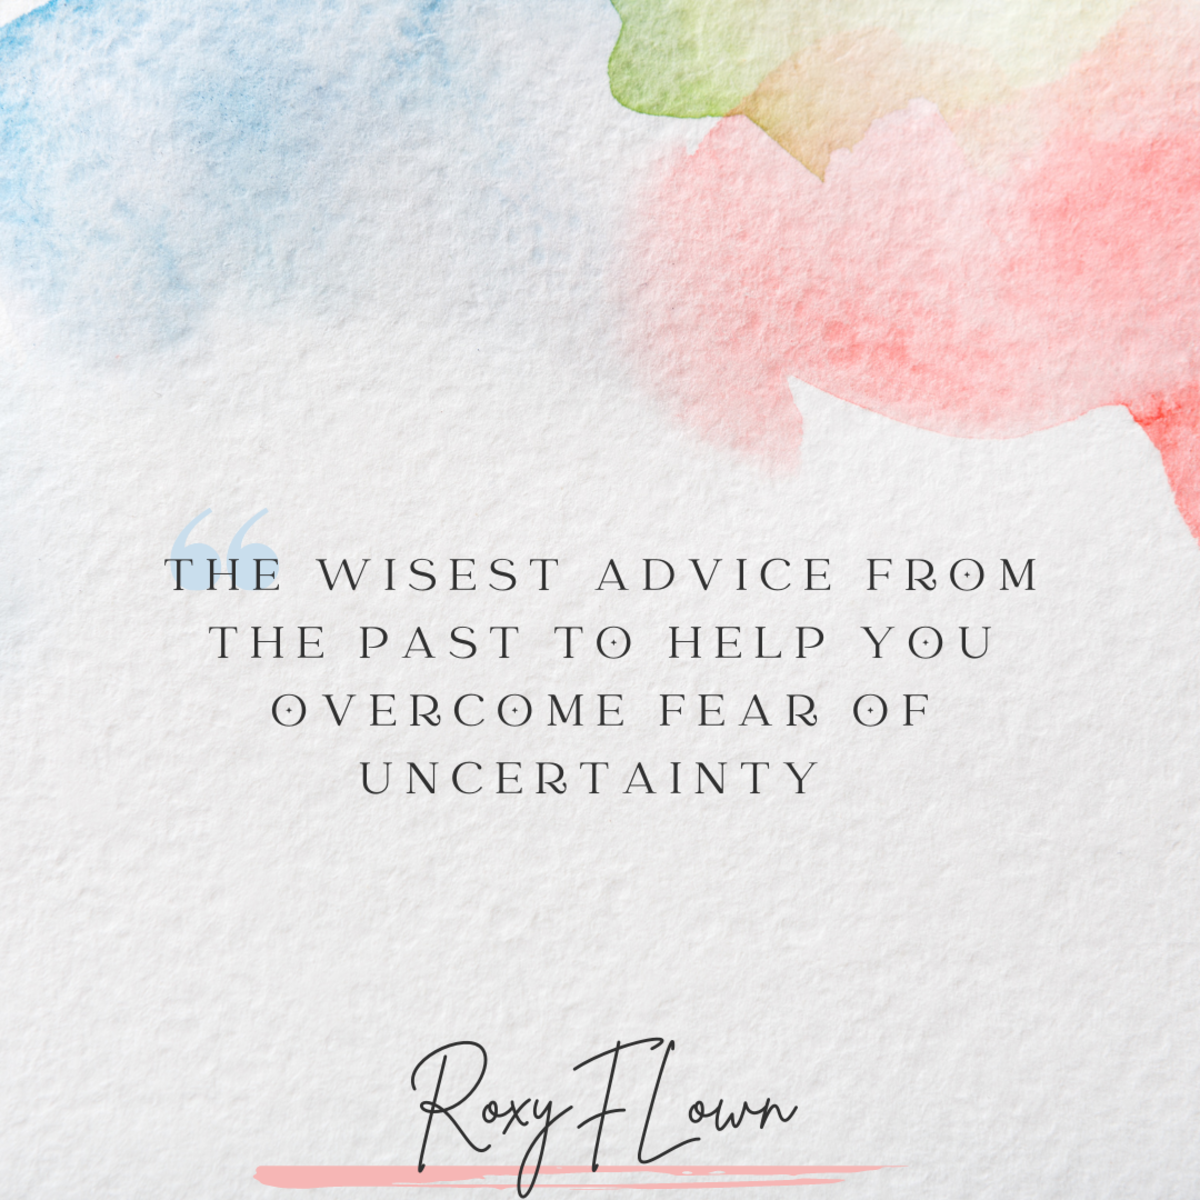 The wisest advice from the past to overcome a fear of uncertainty.